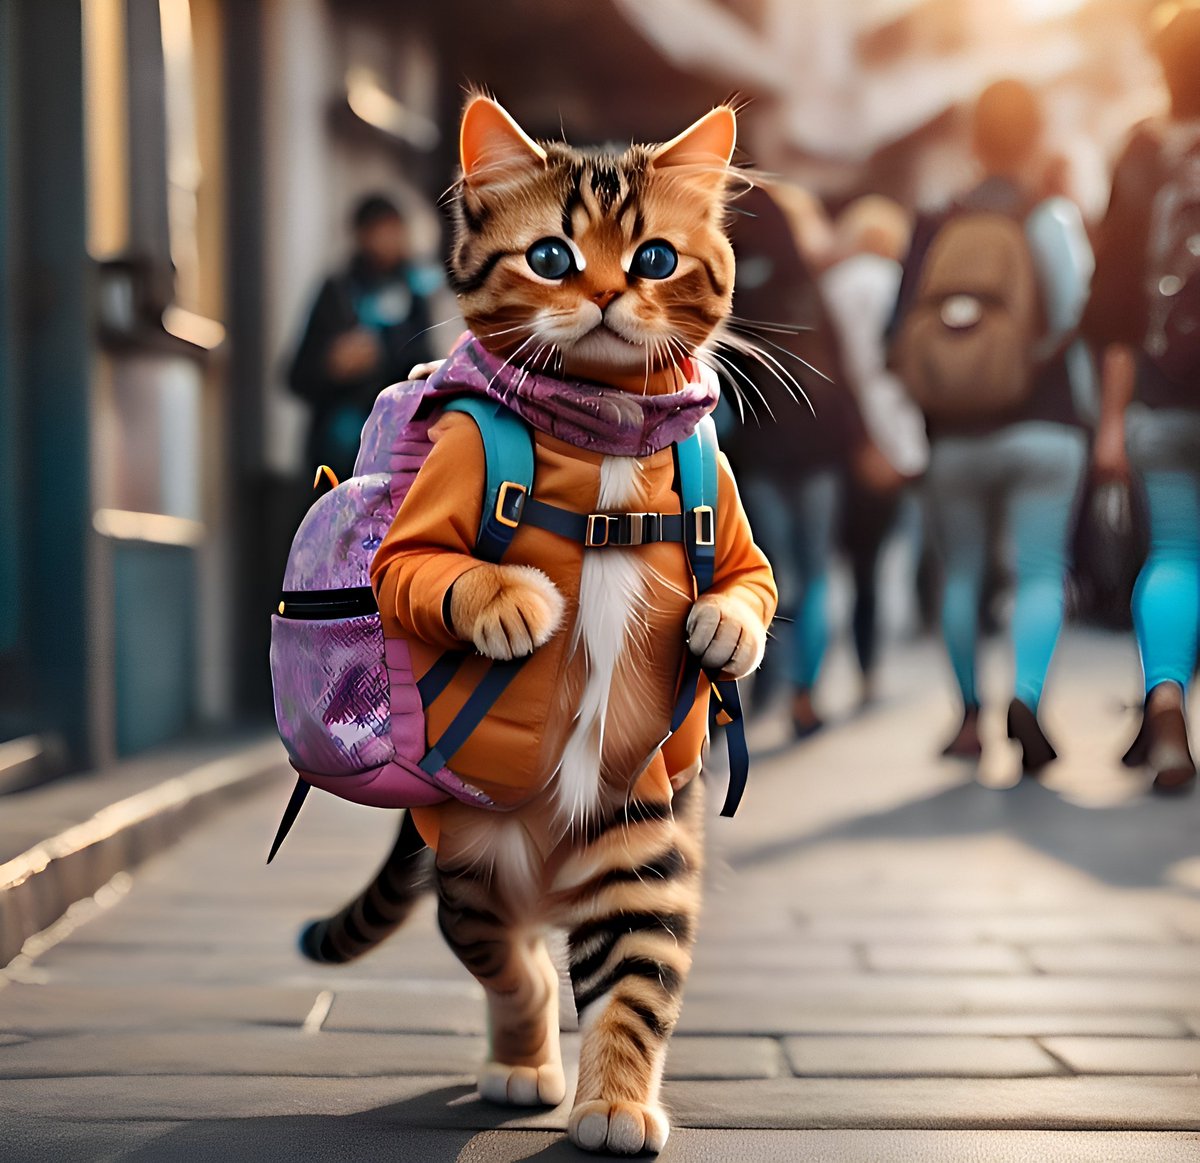 🐱🎒 Strolling down the street like a boss! 🎨🖌️ Check out this realistic artwork of a cat with a backpack. #AIgeneratedArt #CodeCanvasCreations #ArtGallery #CatLove #StreetStyle #RealisticArt #FelineFashion